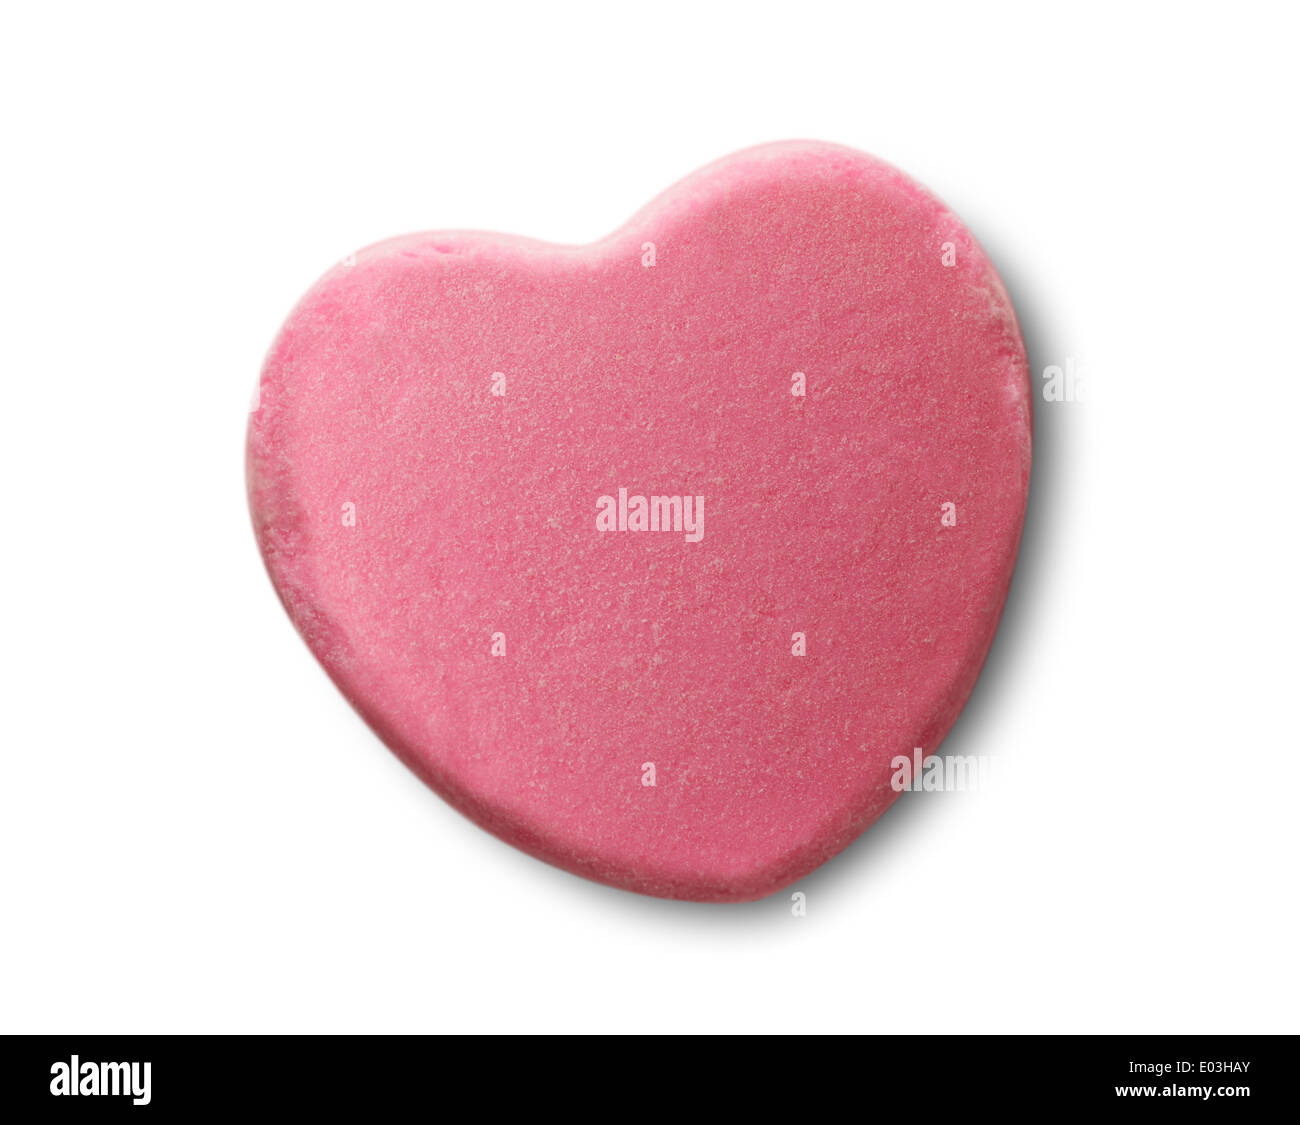 Pink Candy Valentines Heart Isolated on White Background. Stock Photo